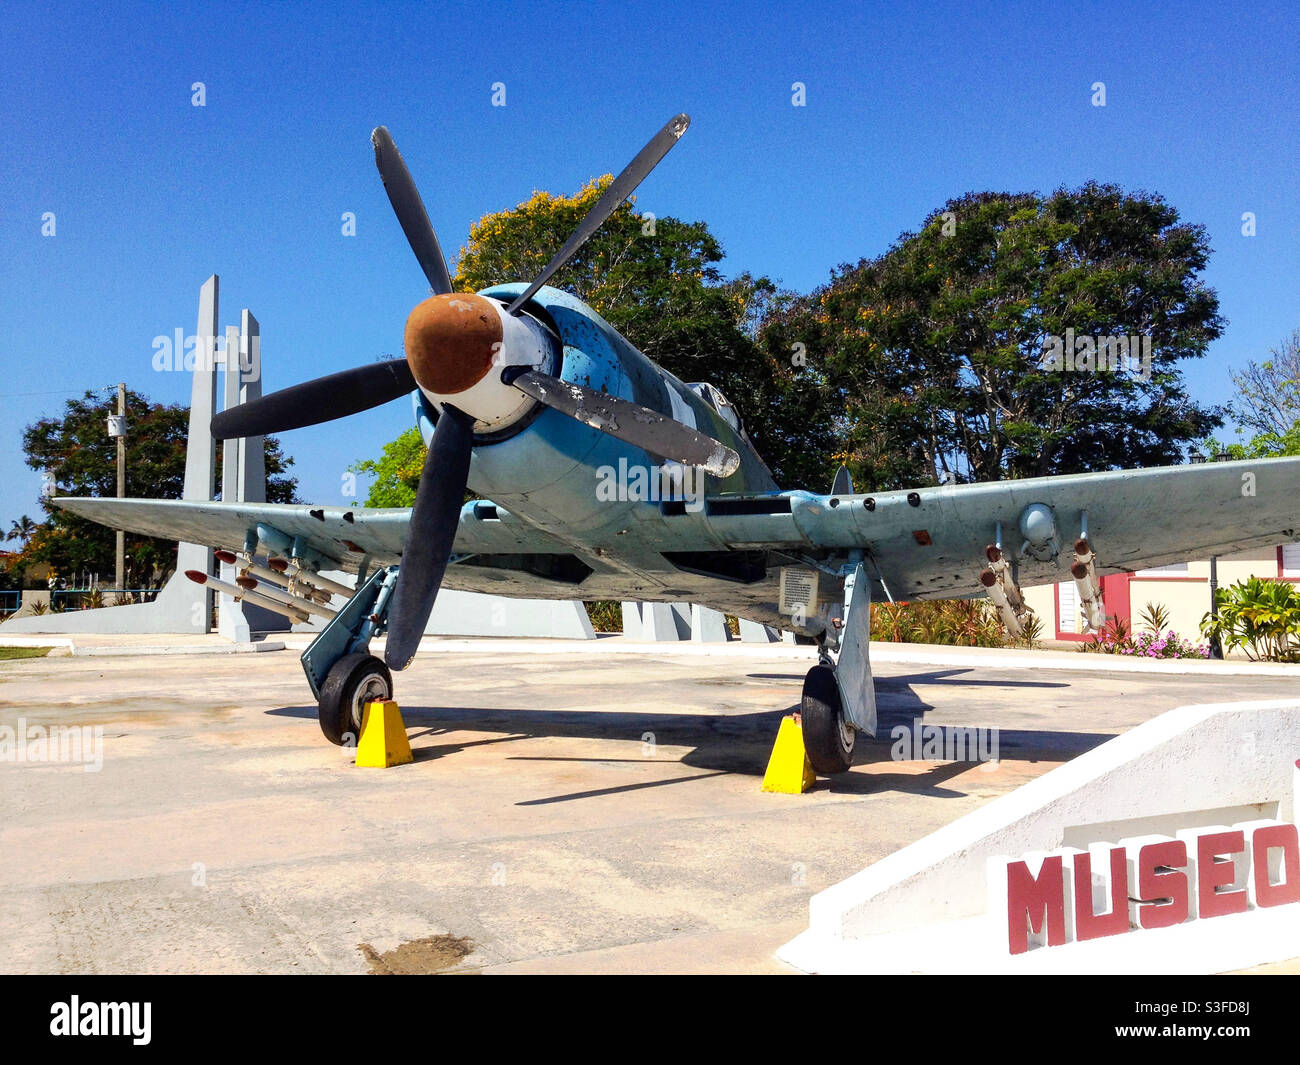 British Hawker Sea Fury fighter aeroplane used by Cuban airforce at Bay of Pigs museum, Playa Giron, Cuba Stock Photo